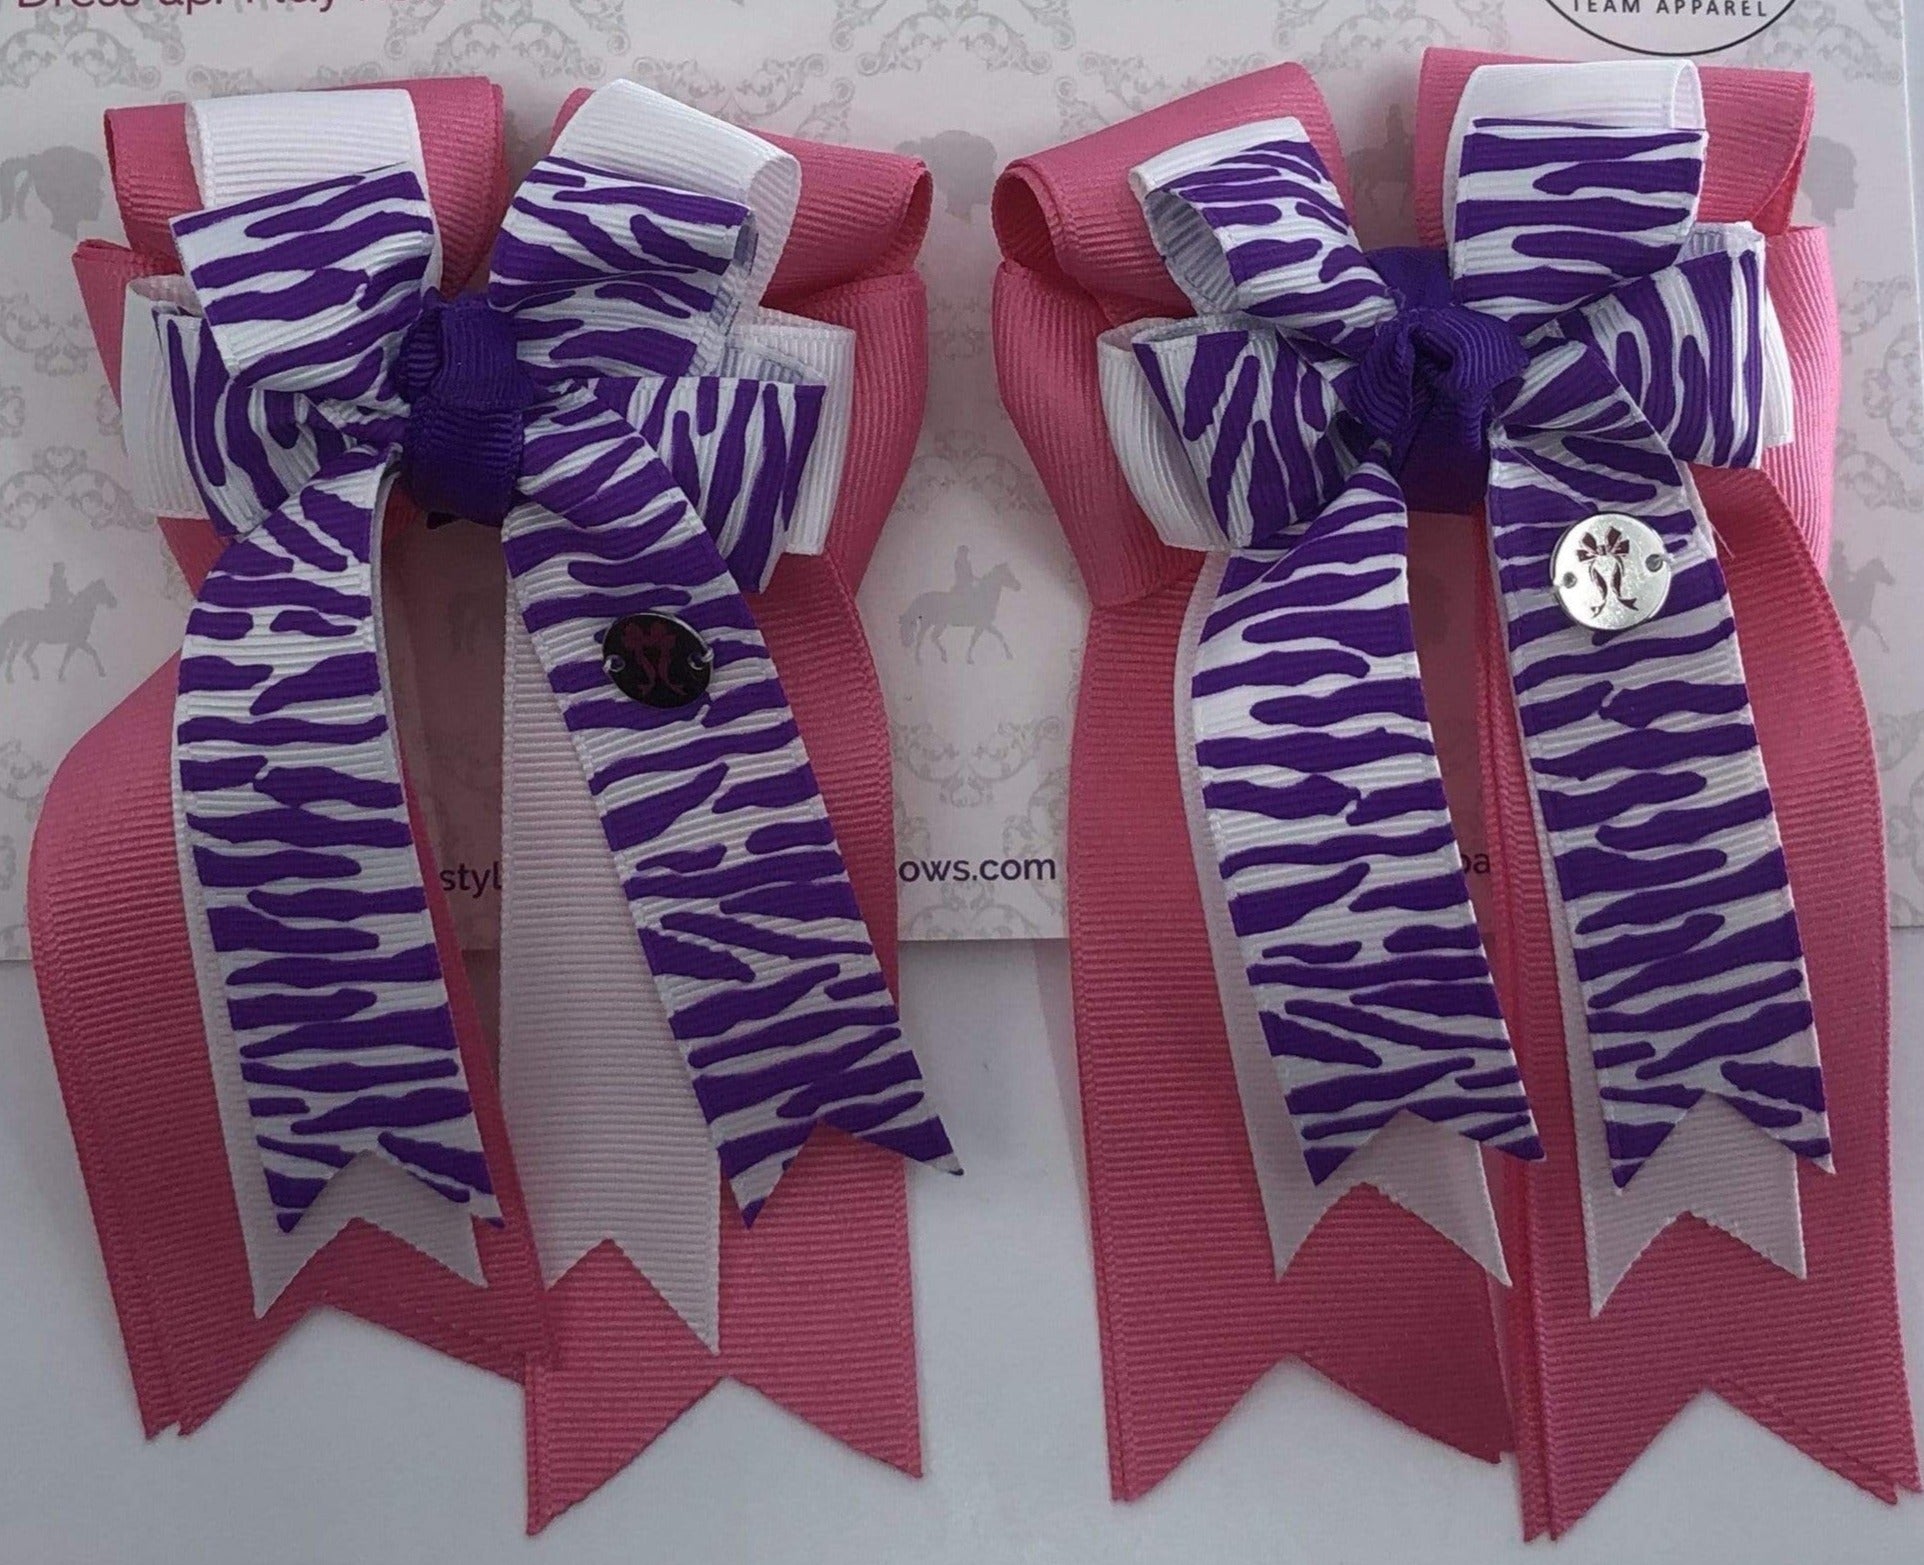 PonyTail Bows 3" Tails Zebra Purple PonyTail Bows equestrian team apparel online tack store mobile tack store custom farm apparel custom show stable clothing equestrian lifestyle horse show clothing riding clothes PonyTail Bows | Equestrian Hair Accessories horses equestrian tack store